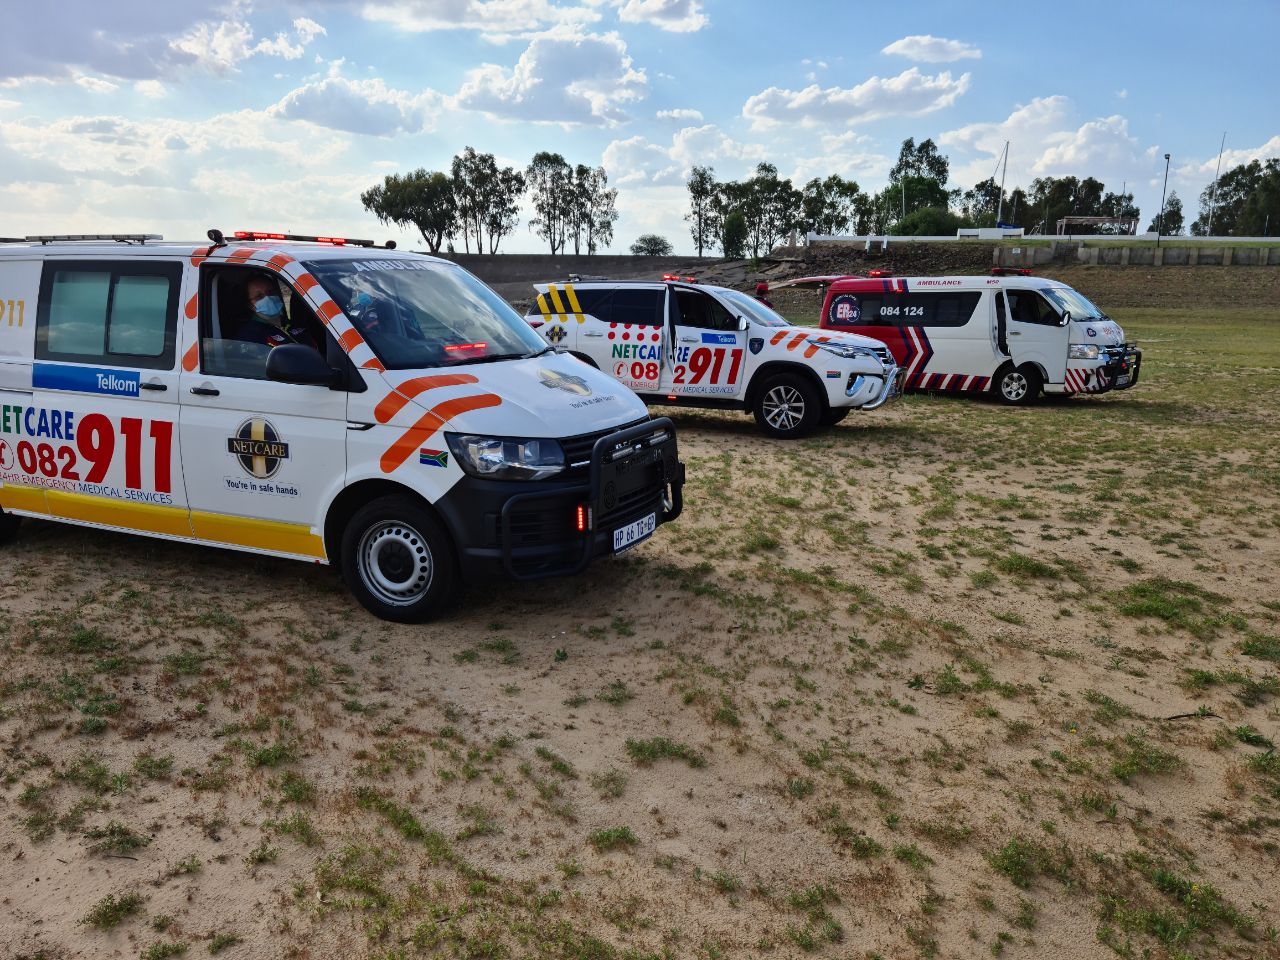 Two critically injured in Vaal River boating incident